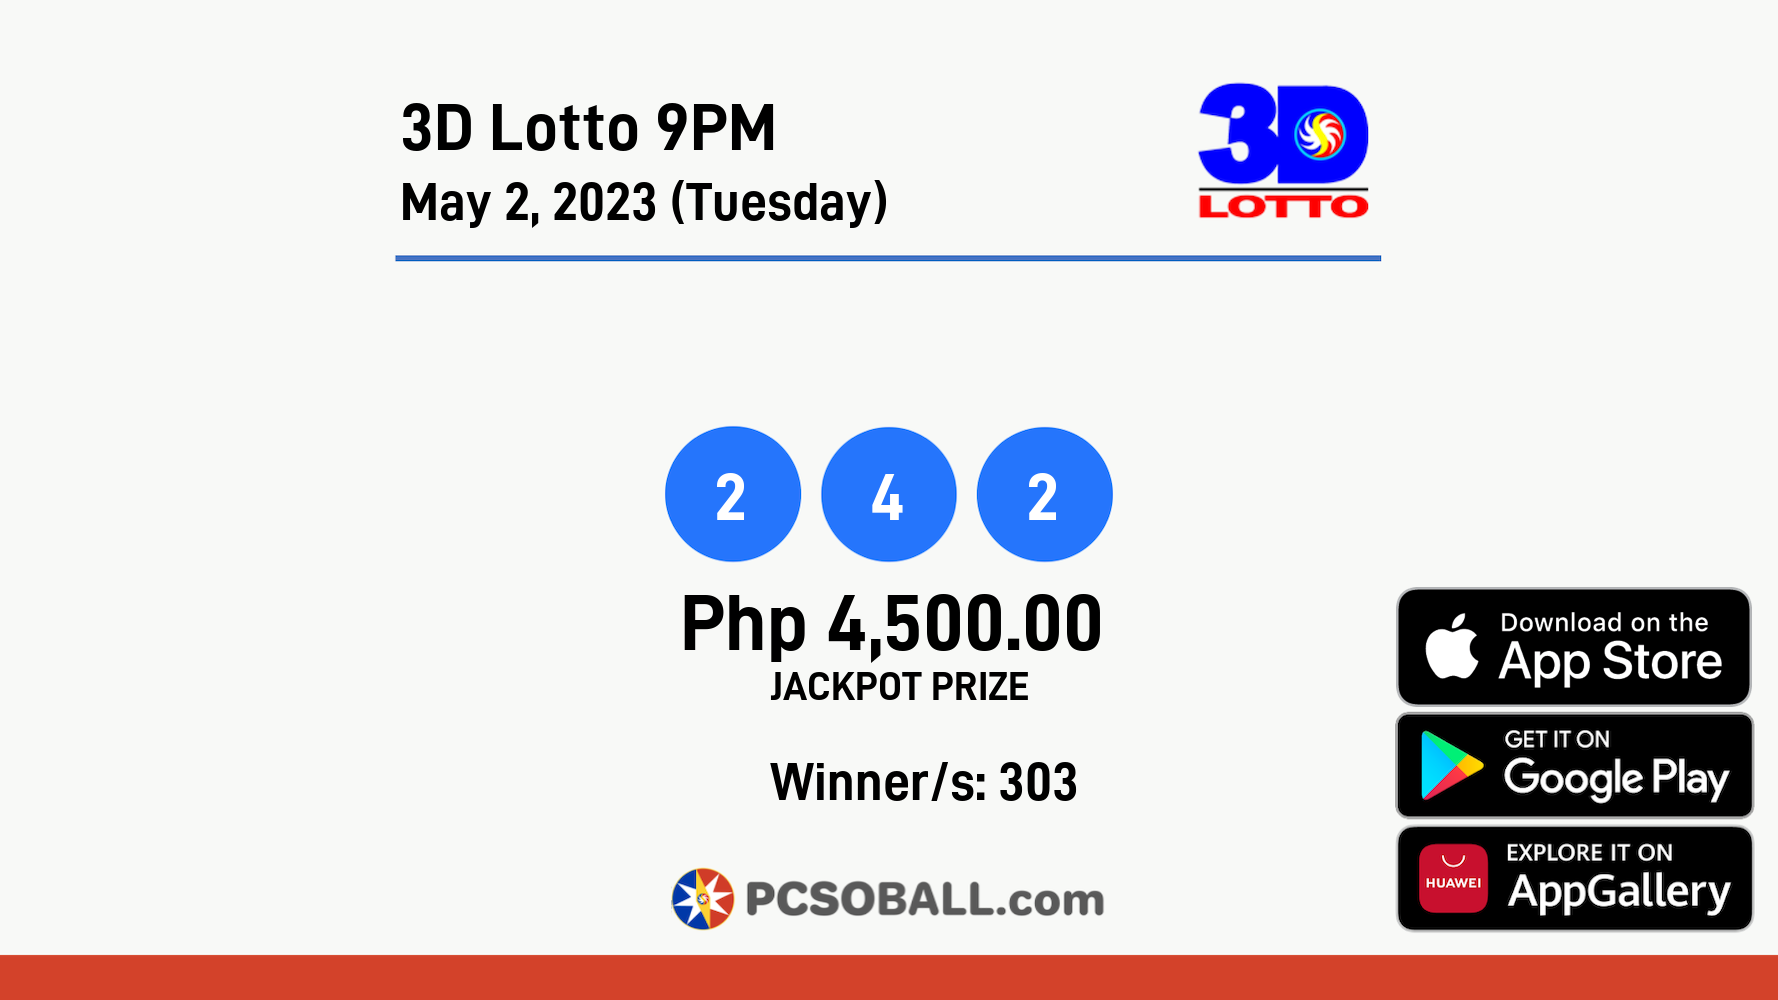 3D Lotto 9PM May 2, 2023 (Tuesday) Result